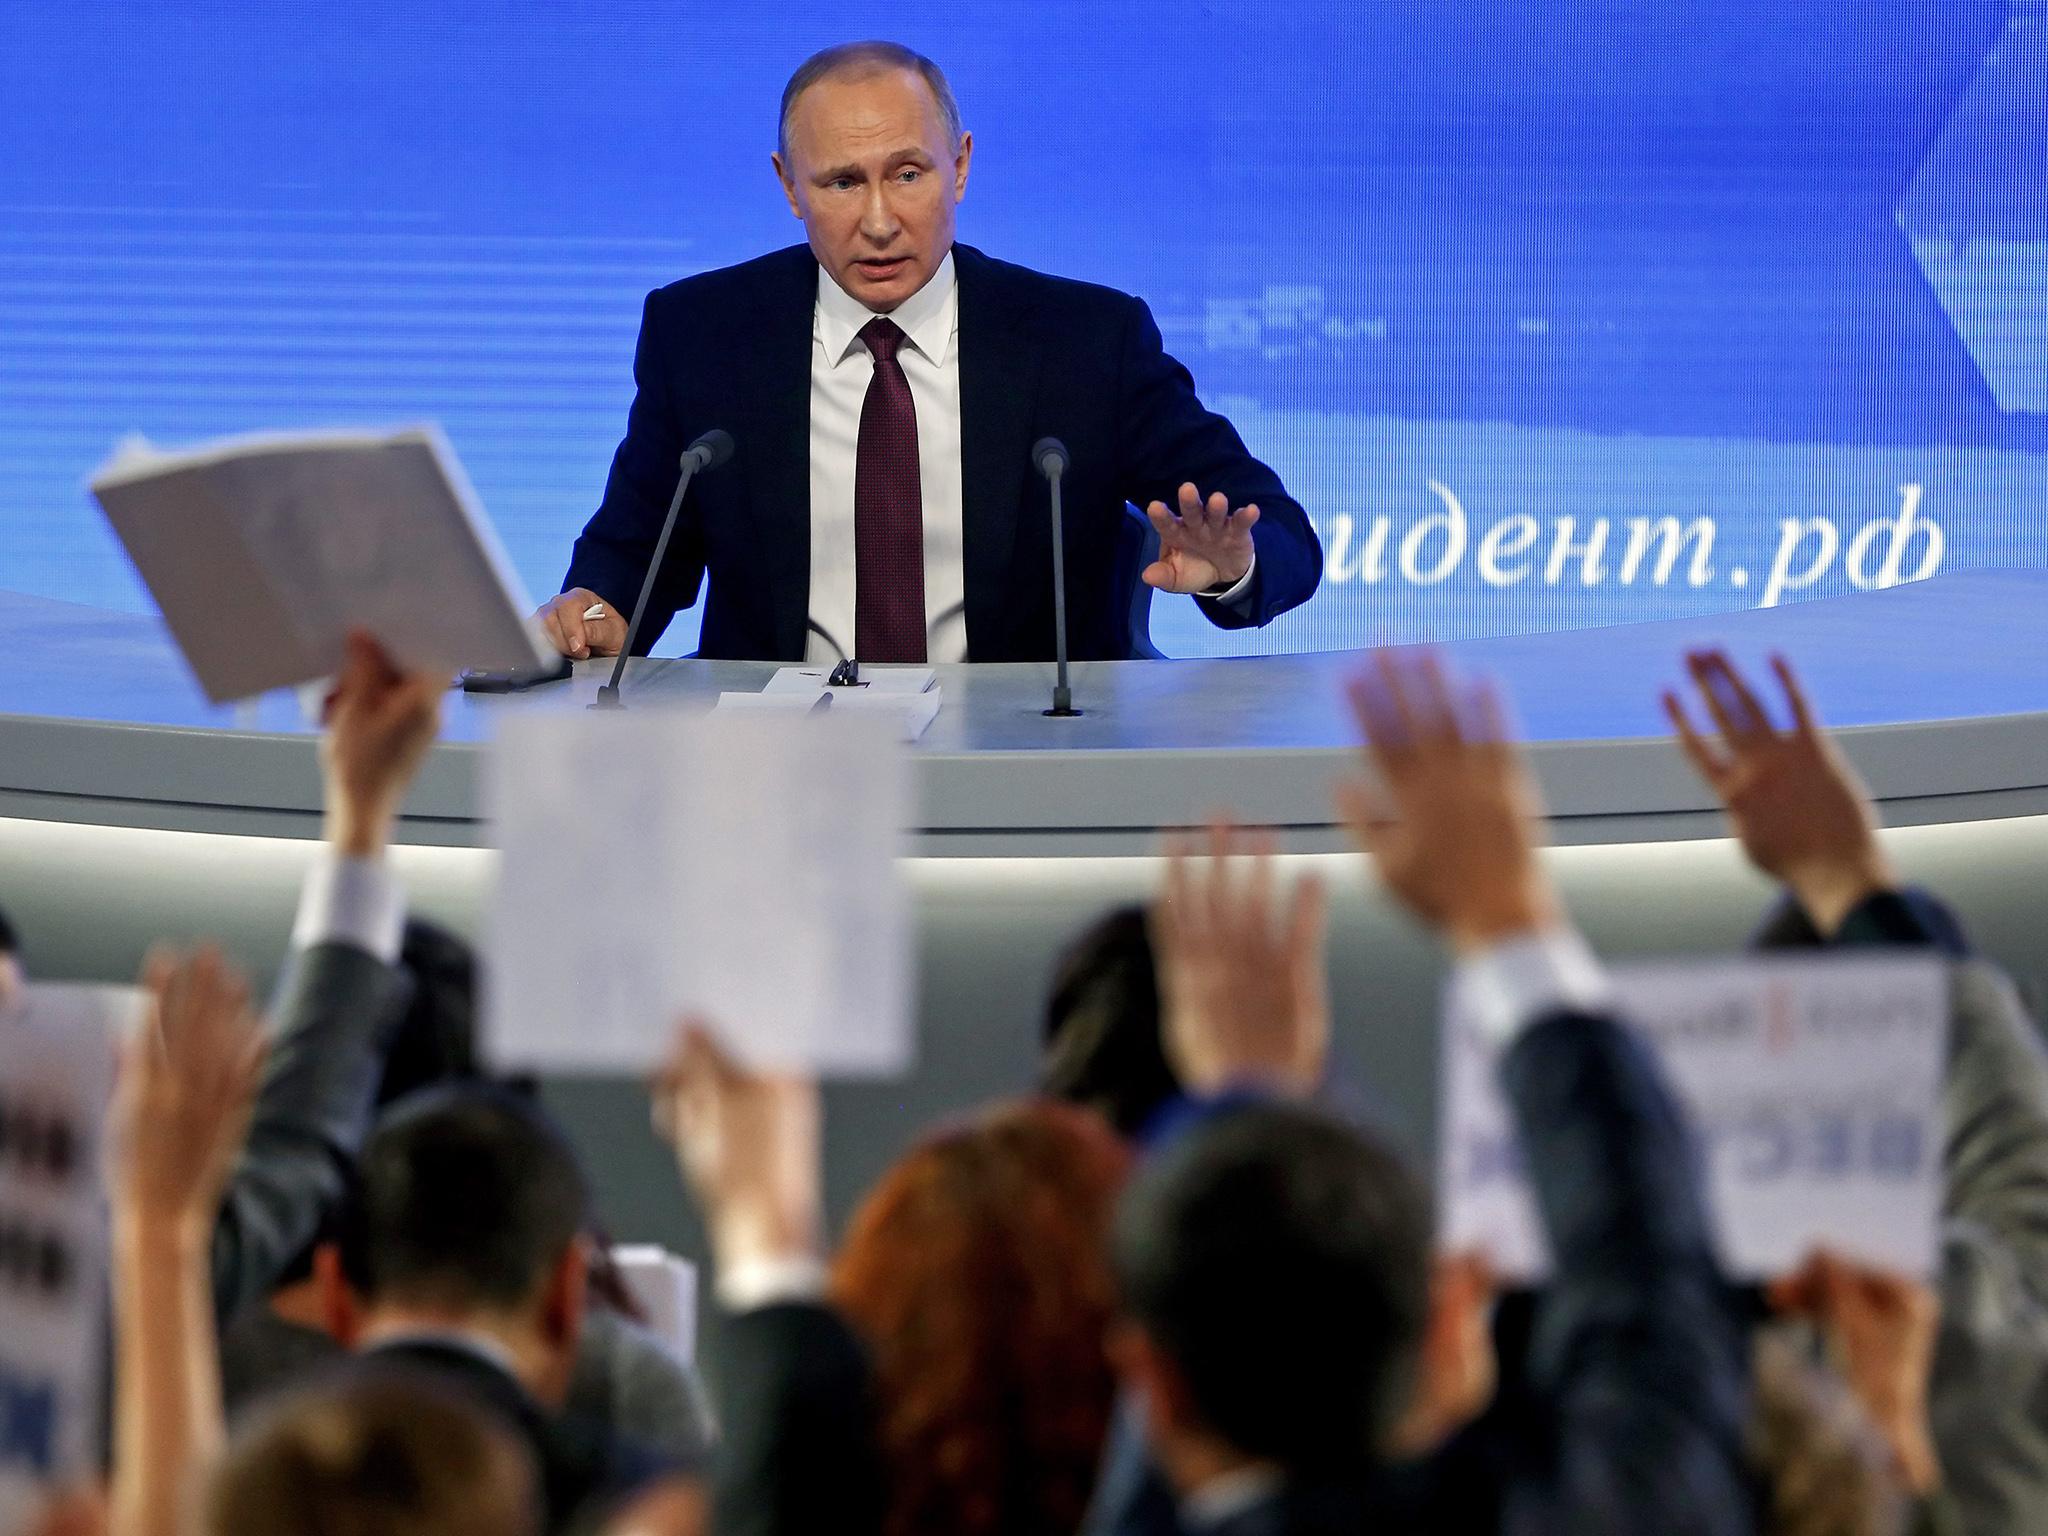 Vladimir Putin fields questions during his annual press conference in Moscow